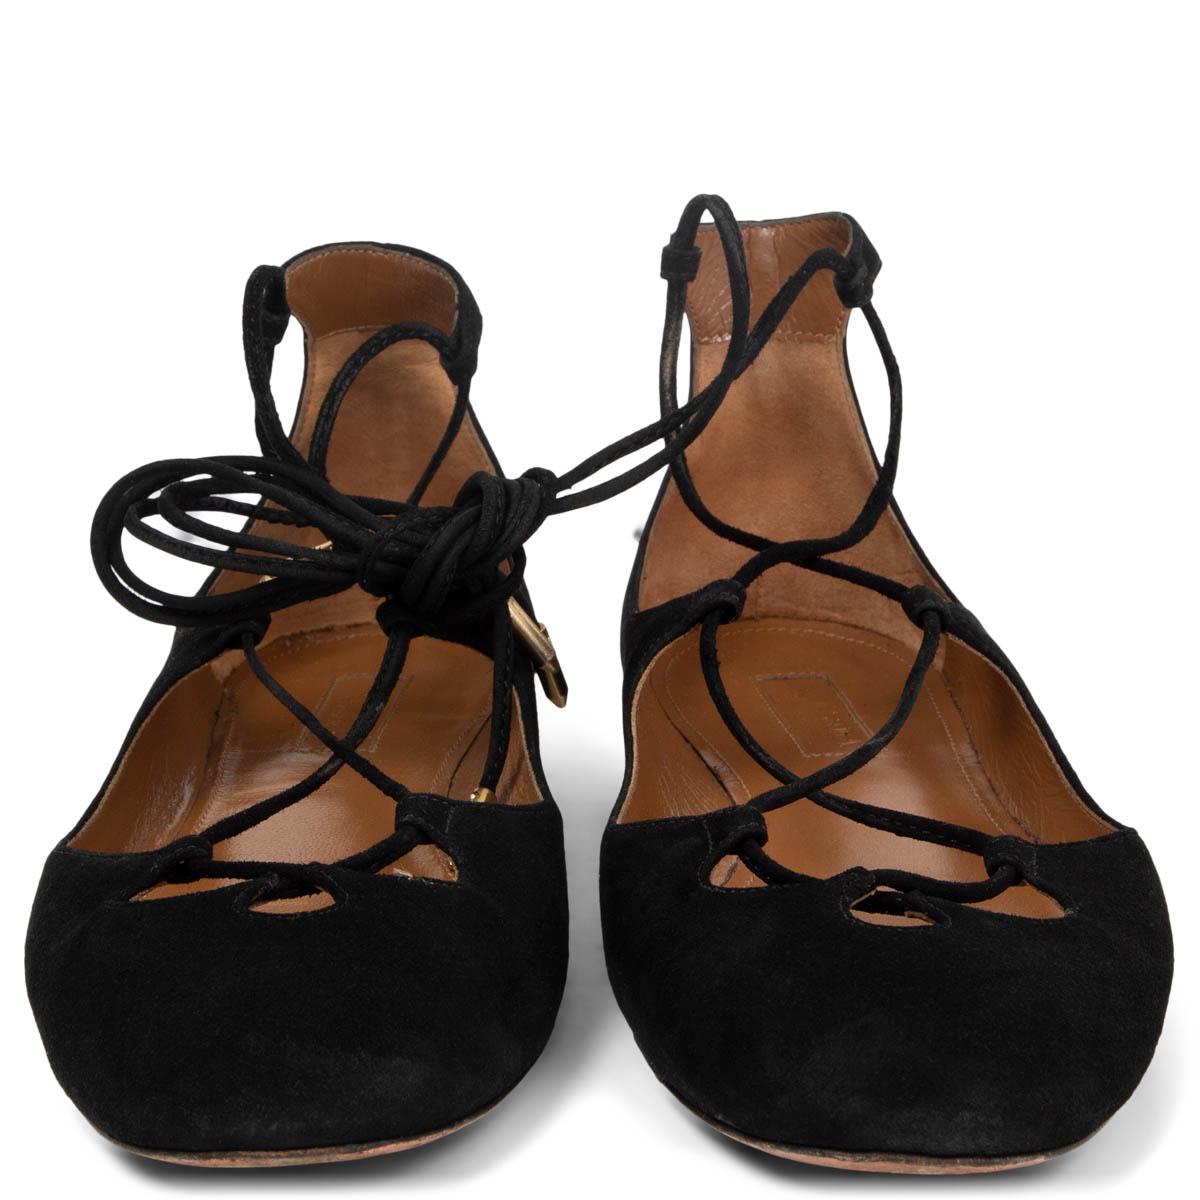 100% authentic Aquazzura Dancer lace-up ballet flats in balck suede with metallic gold-tone detail at the heel. Have been worn and are in excellent condition. 

Measurements
Imprinted Size	37.5
Shoe Size	37.5
Inside Sole	25.5cm (9.9in)
Width	7cm